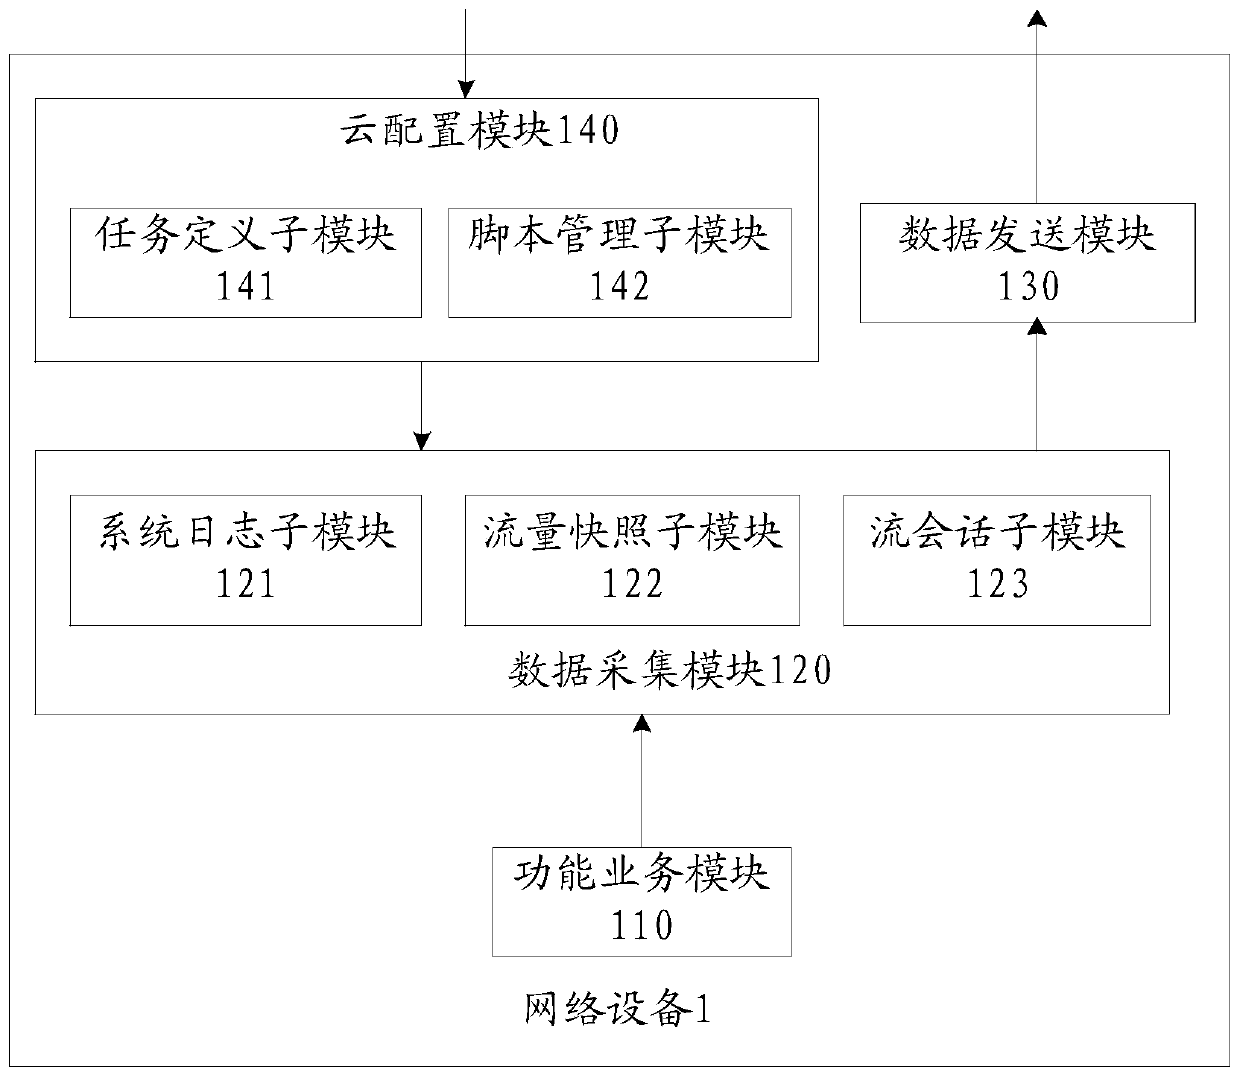 Remote diagnosis method and system for network equipment, network equipment and cloud server